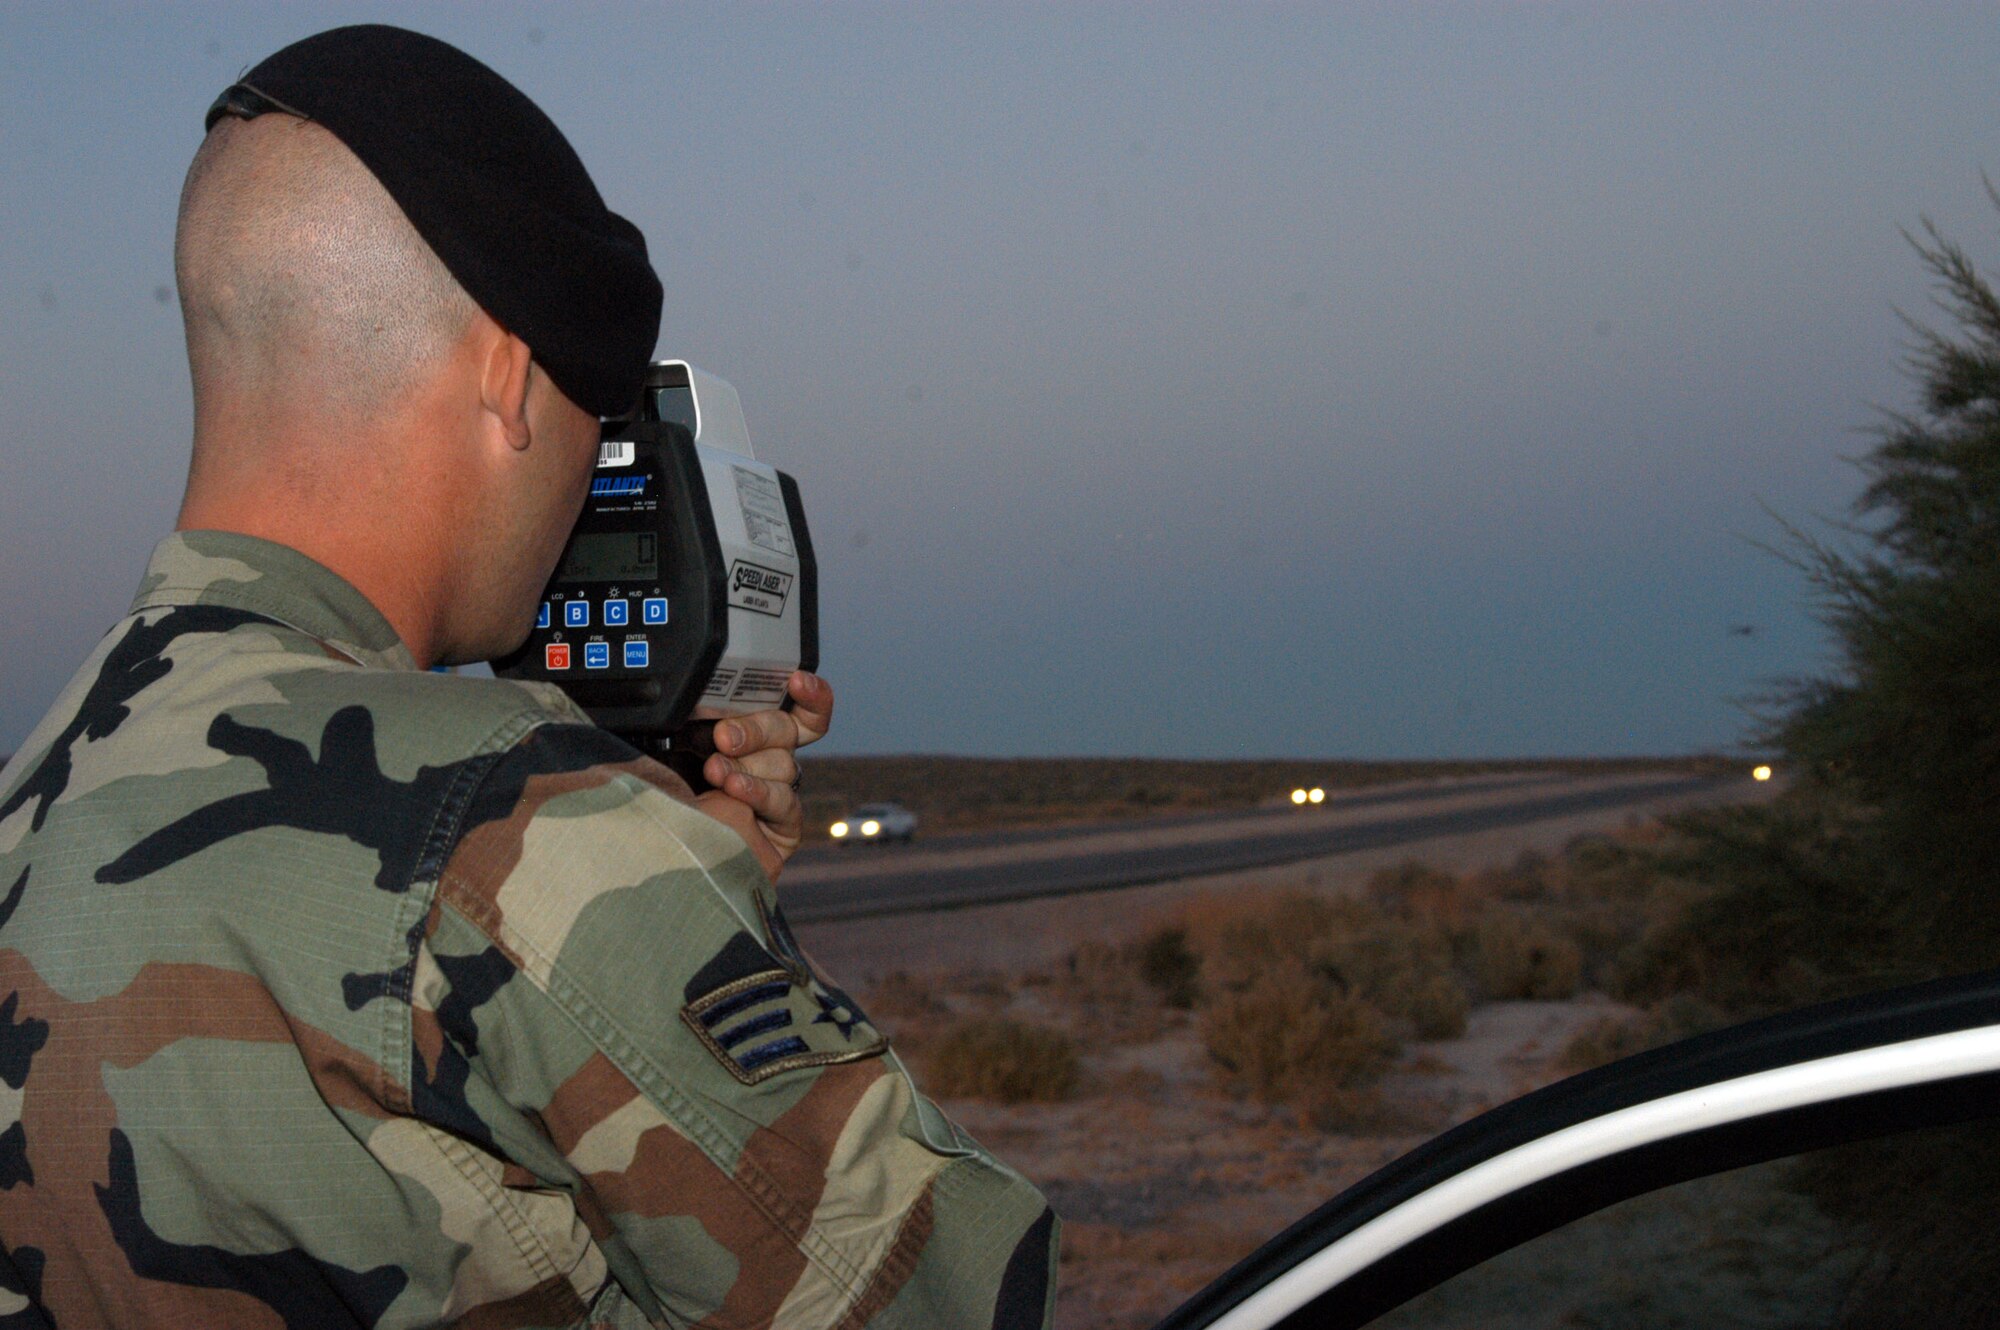 Senior Airman Adam Mastropaolo, 95th Security Forces Squadron installation patrolman, monitors the speed of motorists on Rosamond Boulevard here July 8, 2006. Airman Mastropaolo was using a LIDAR gun that measures the vehicle's speed up to a mile away. One of the mission of 95th SFS is to provide base safety during night time.  (Photo by Airman Stacy Garcia)